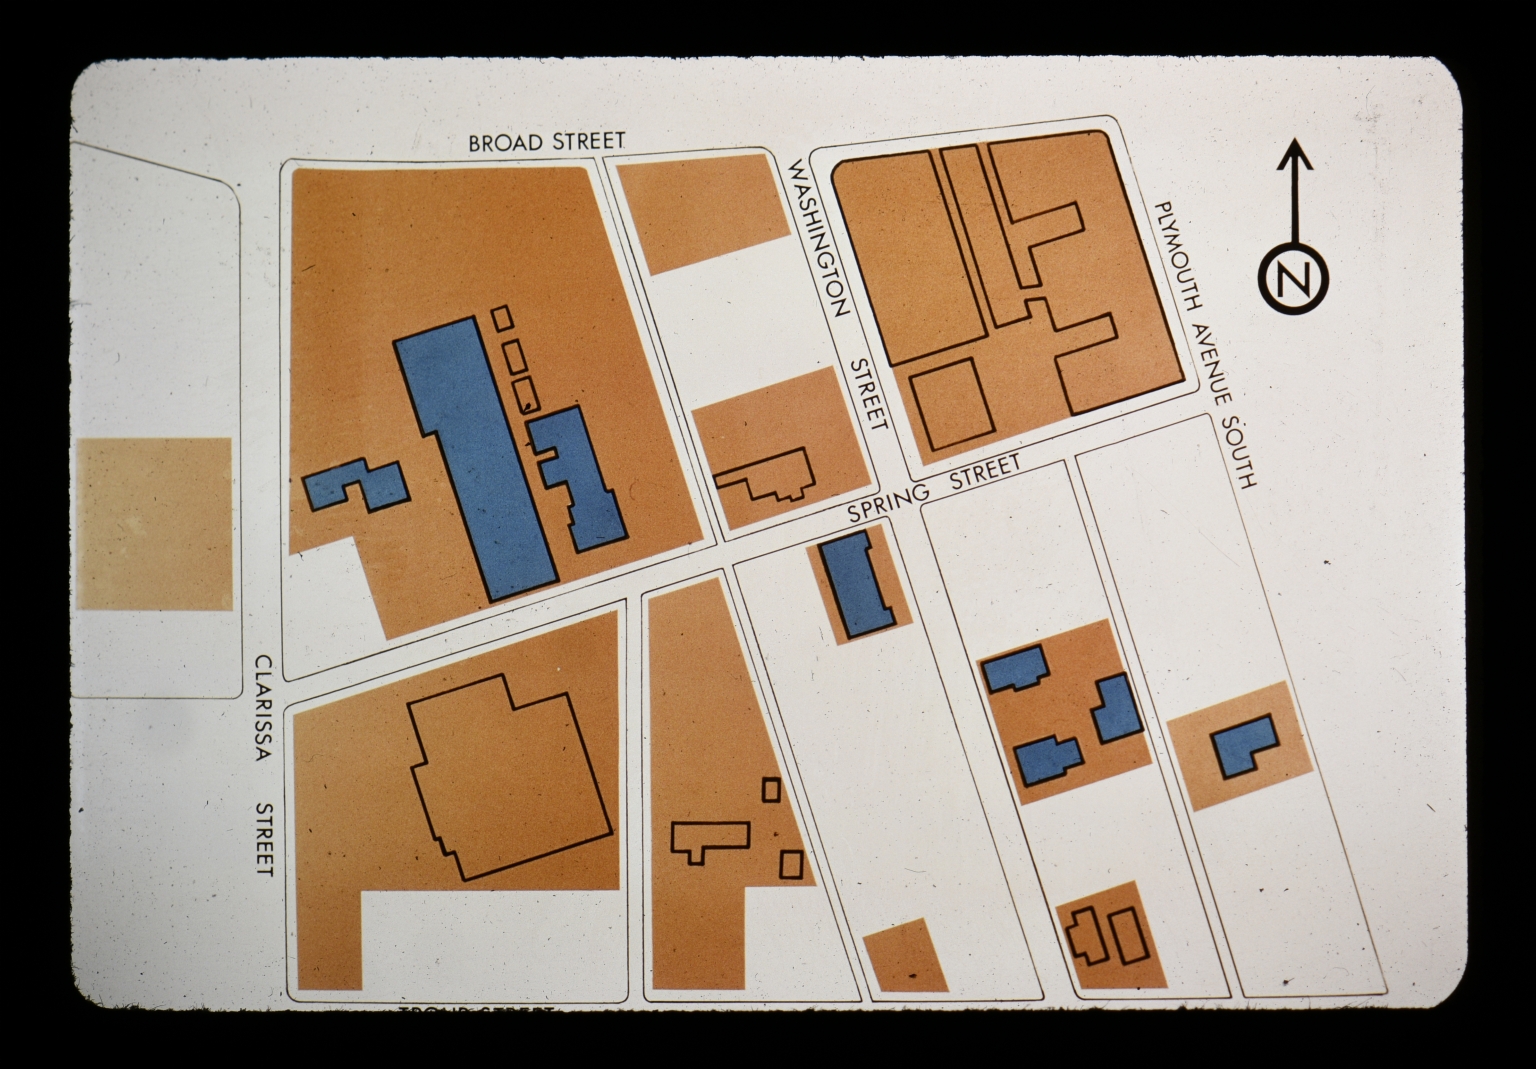 Downtown campus map